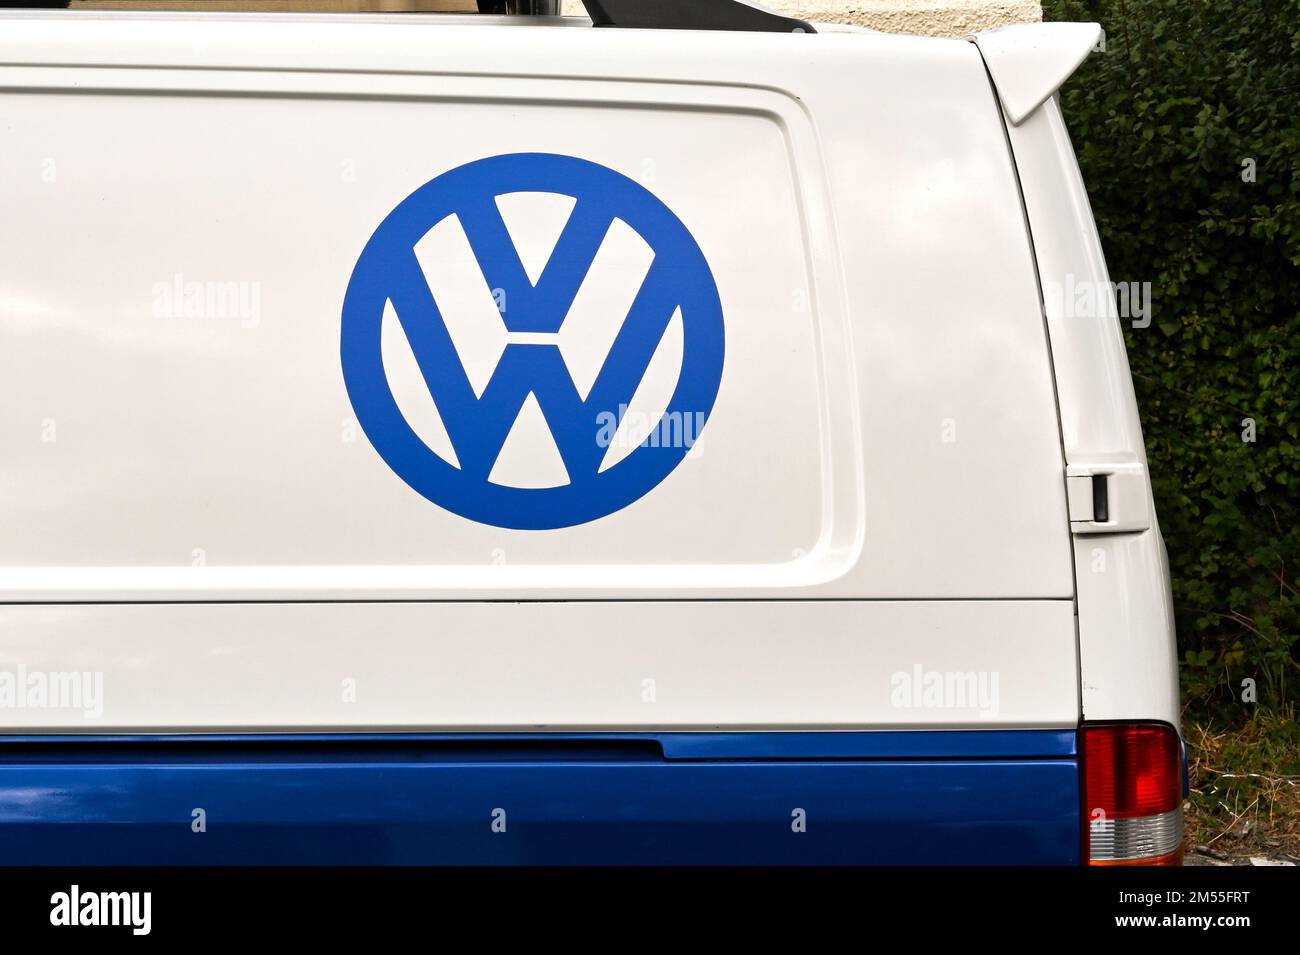 Newport, Pembrokeshire, Wales - August 2022: Close up view of the sign on the side of a Volkswagen VW Transporter van Stock Photo